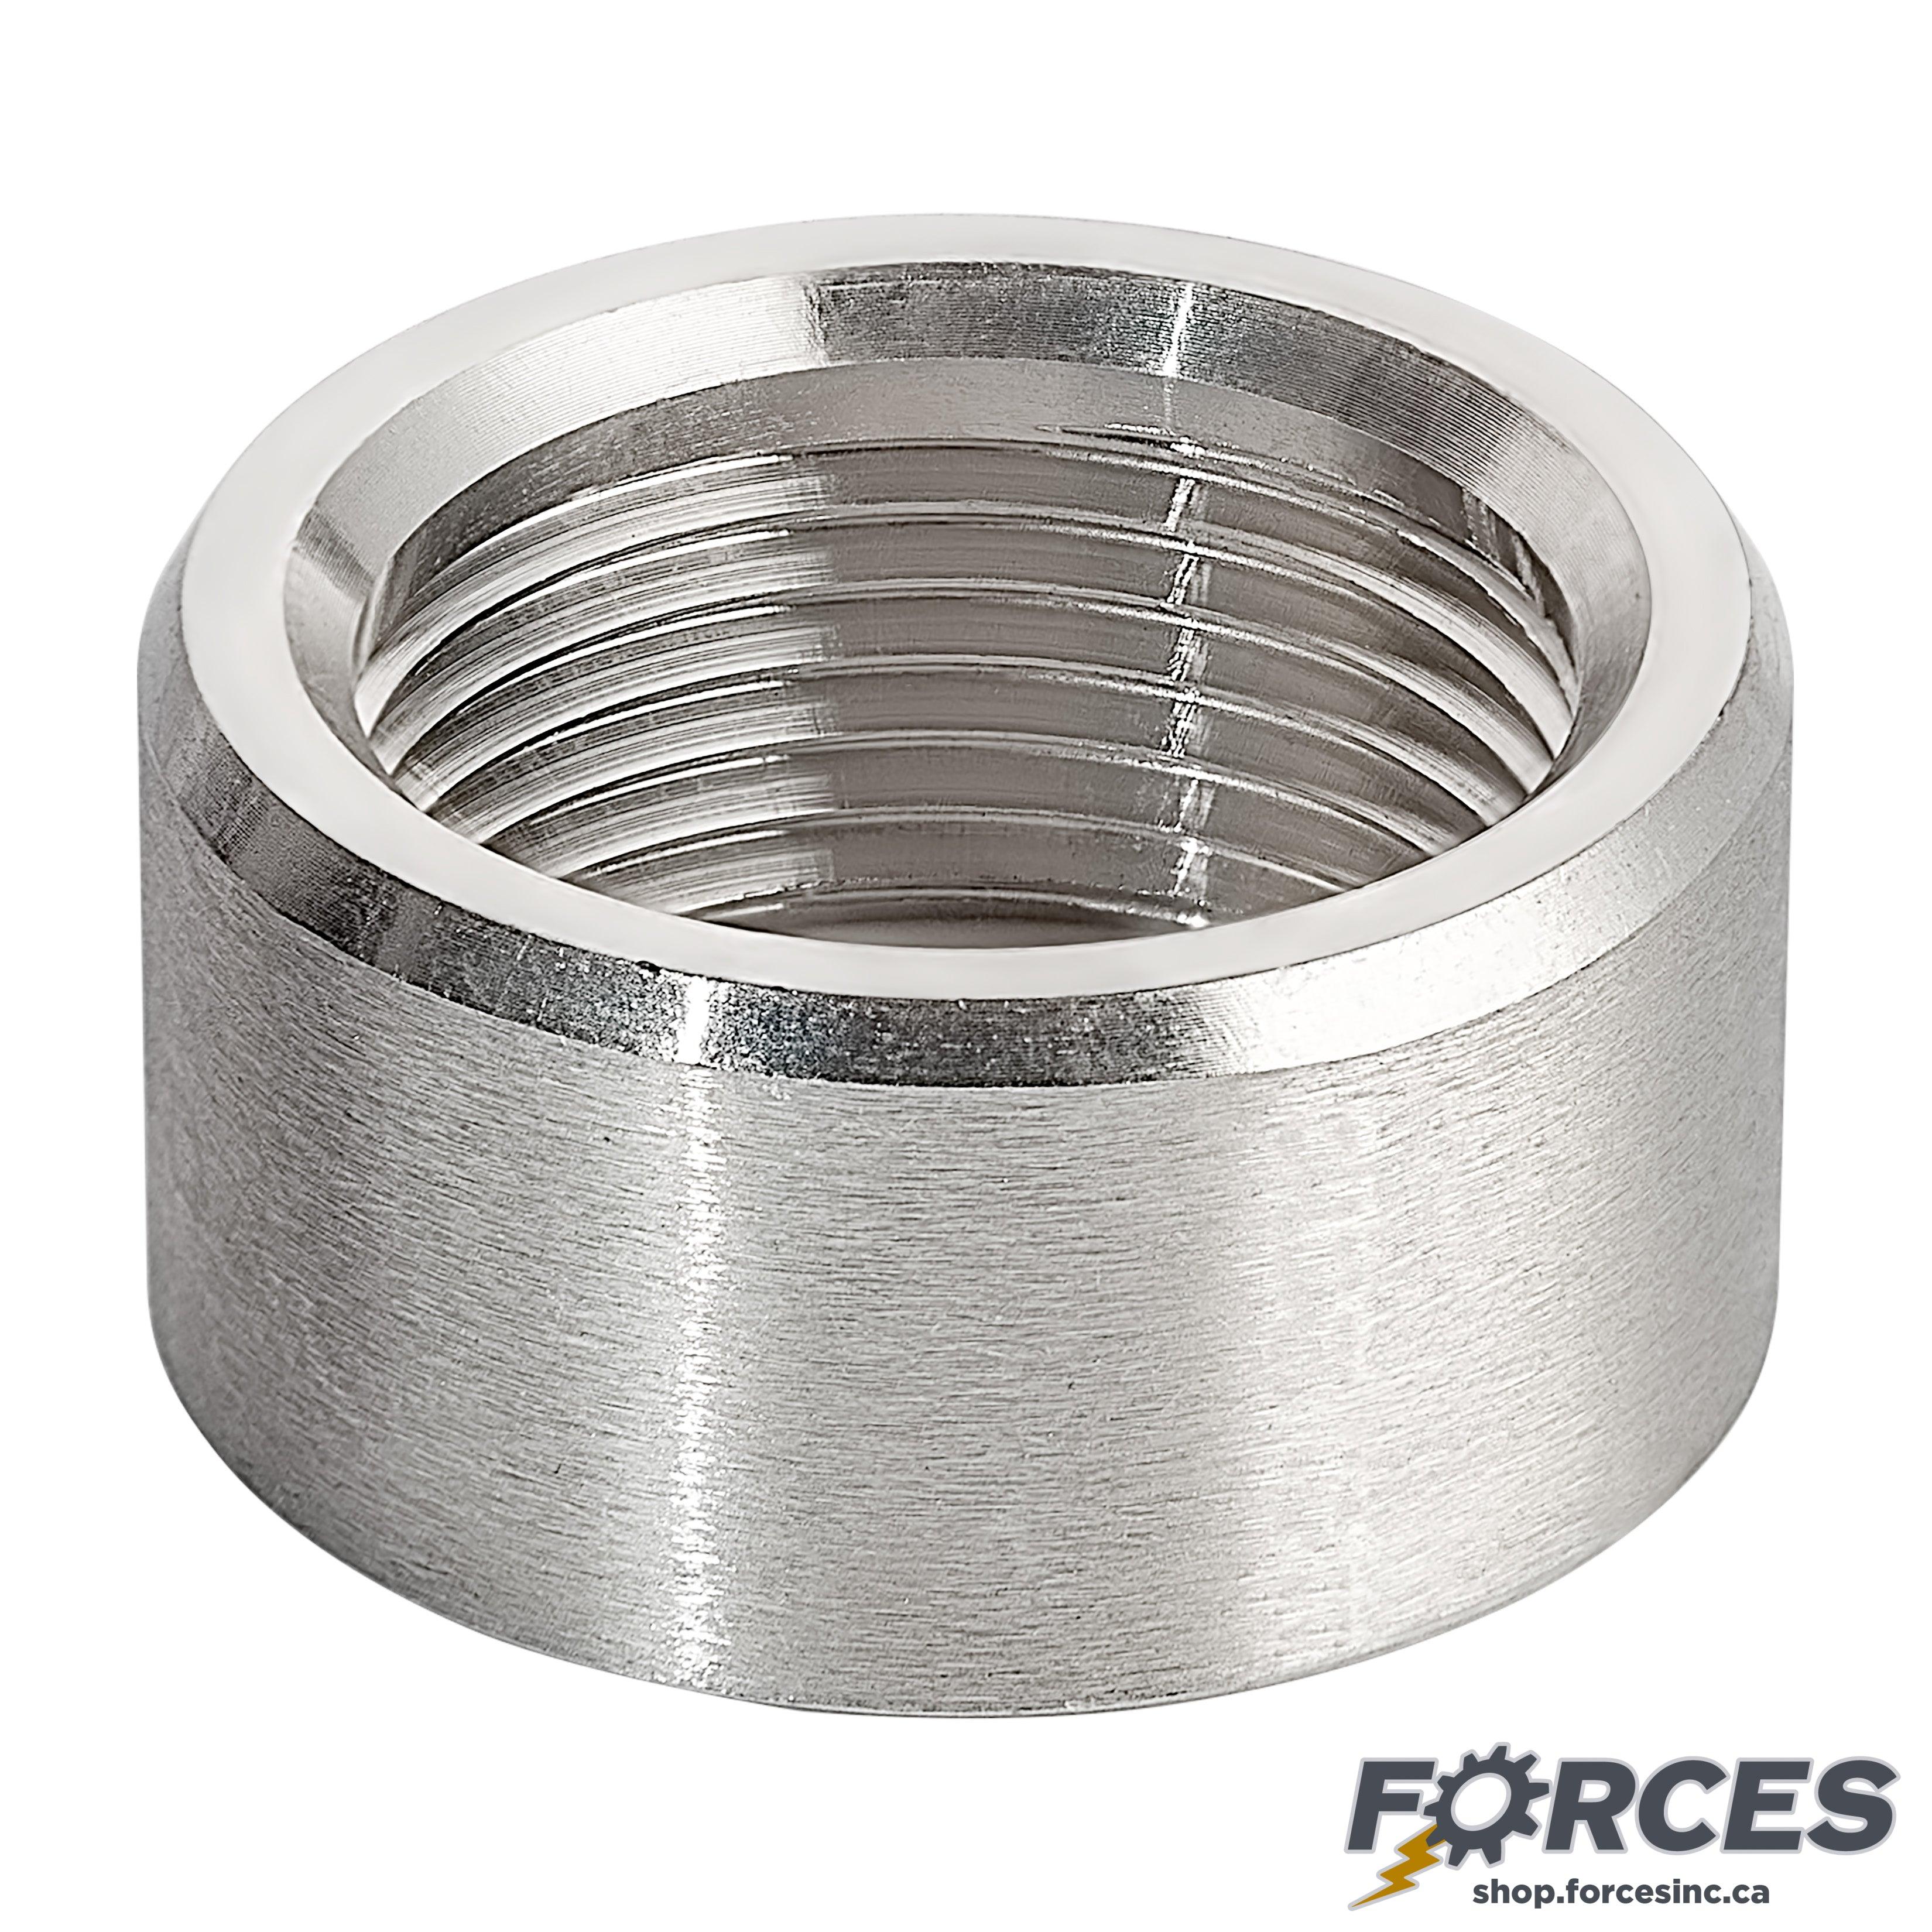 1-1/2" Half-Coupling NPT #150 - Stainless Steel 316 - Forces Inc